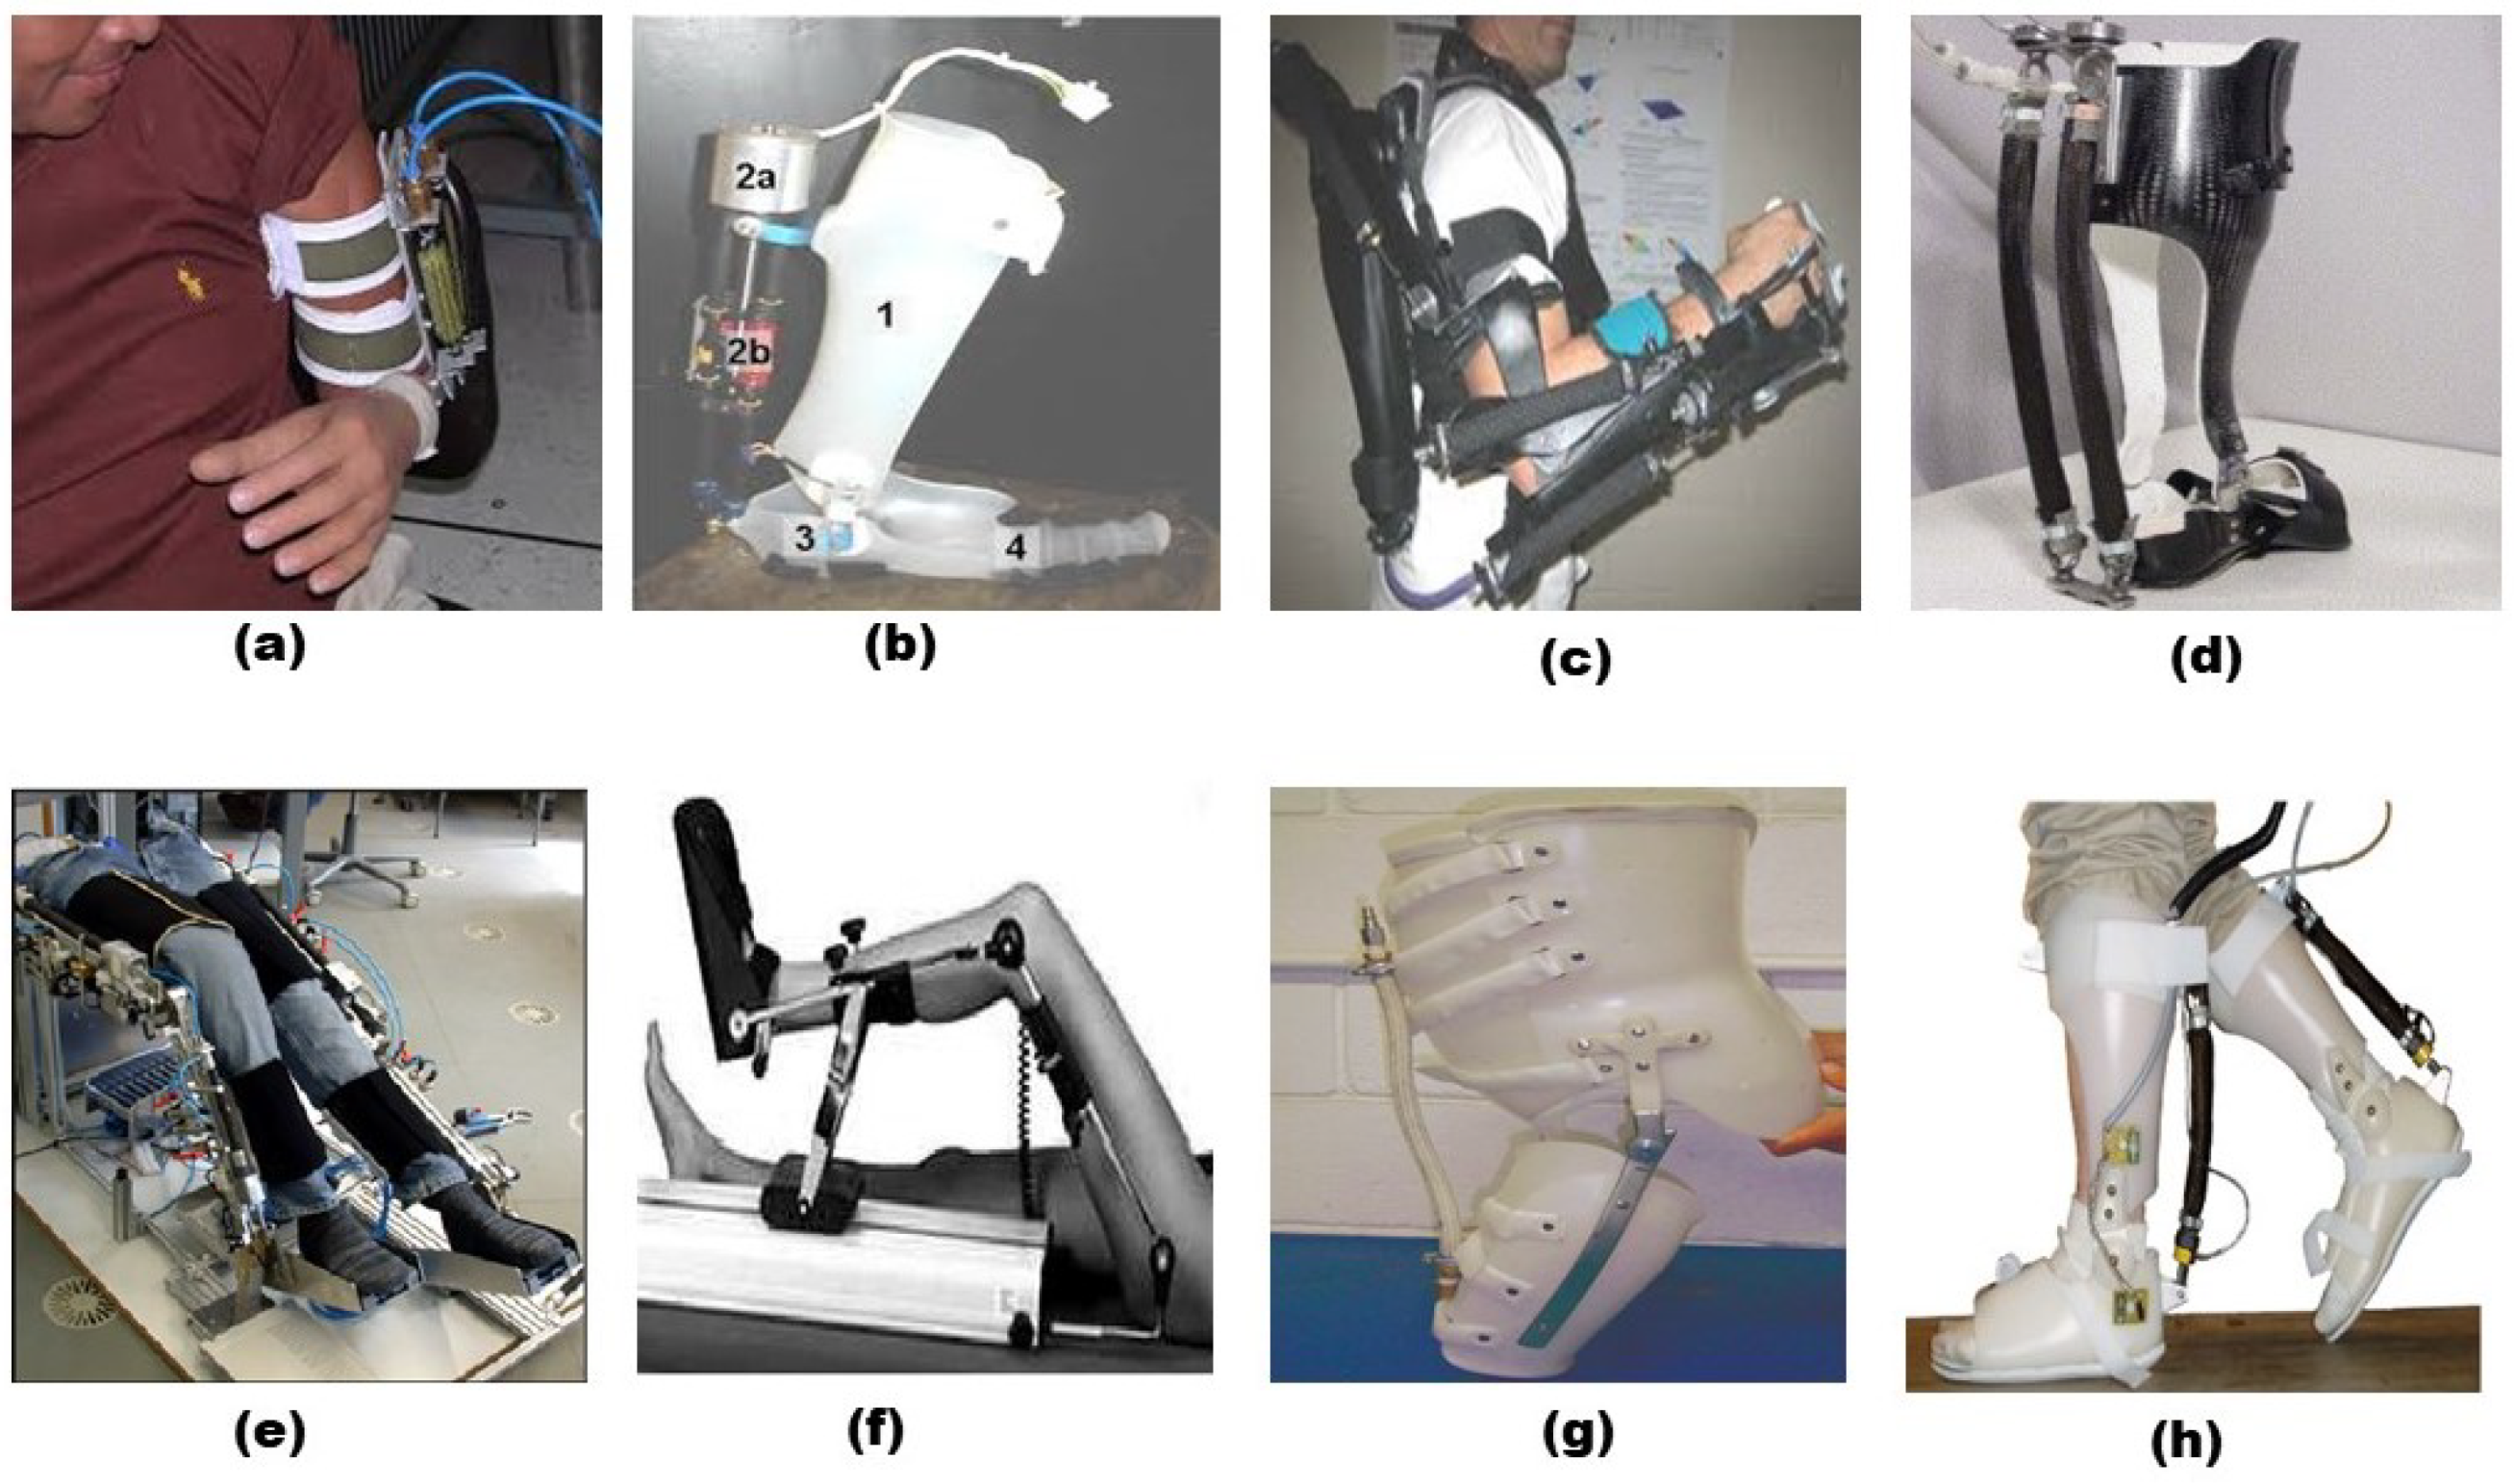 Development of Active Lower Limb Robotic-Based Orthosis and